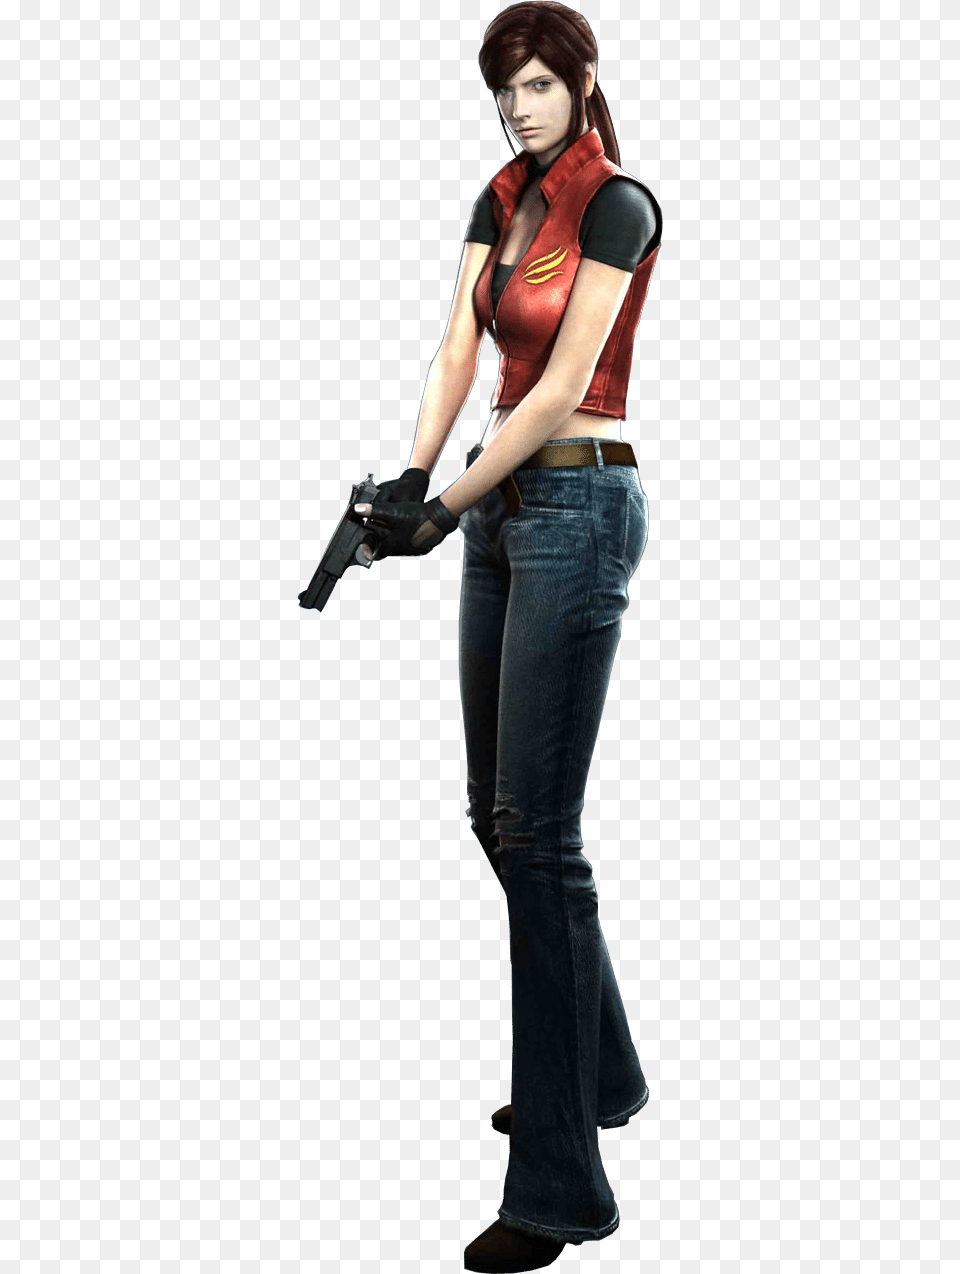 Claire Redfield Resident Evil Resident Evil Code Veronica Claire Redfield, Handgun, Clothing, Costume, Weapon Free Png